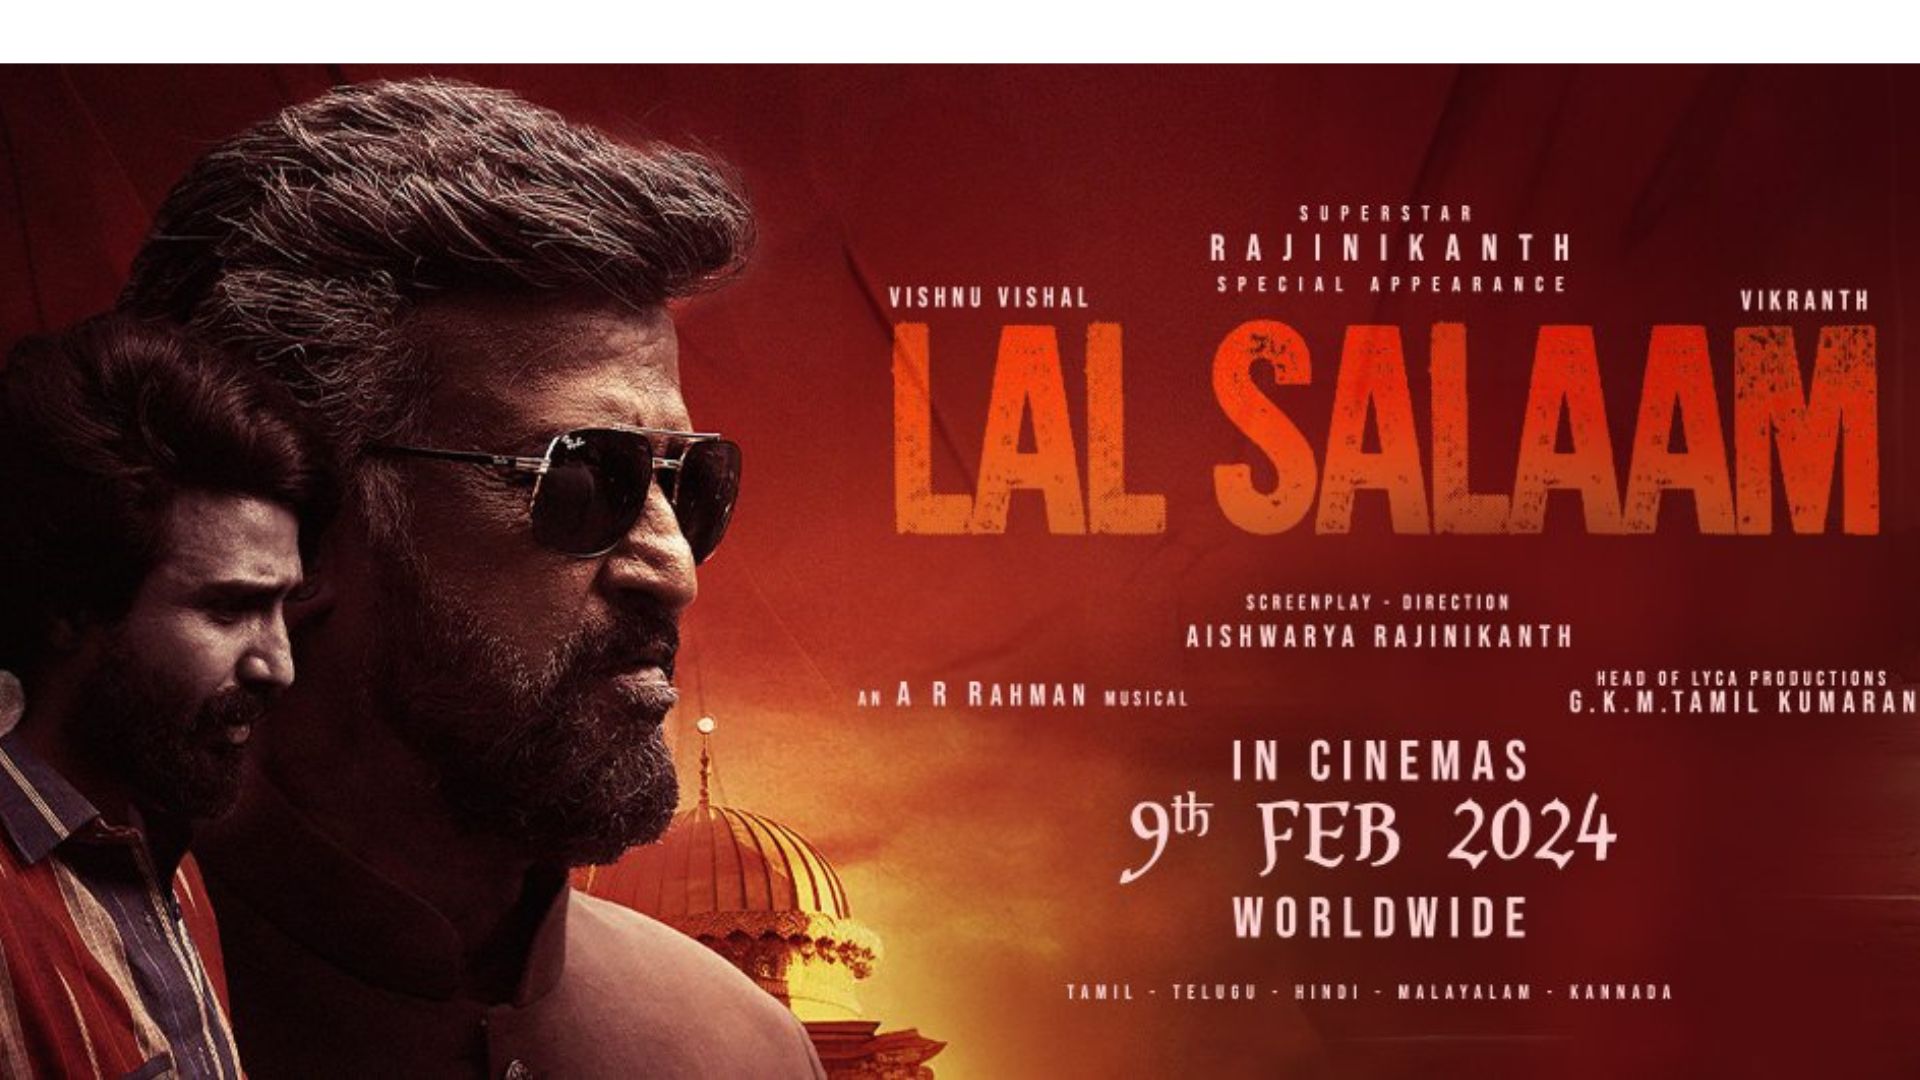 Lal Salaam trailer: Kapil Dev and Rajinikanth will be appearing together, with Kapil Dev making his cameo appearance